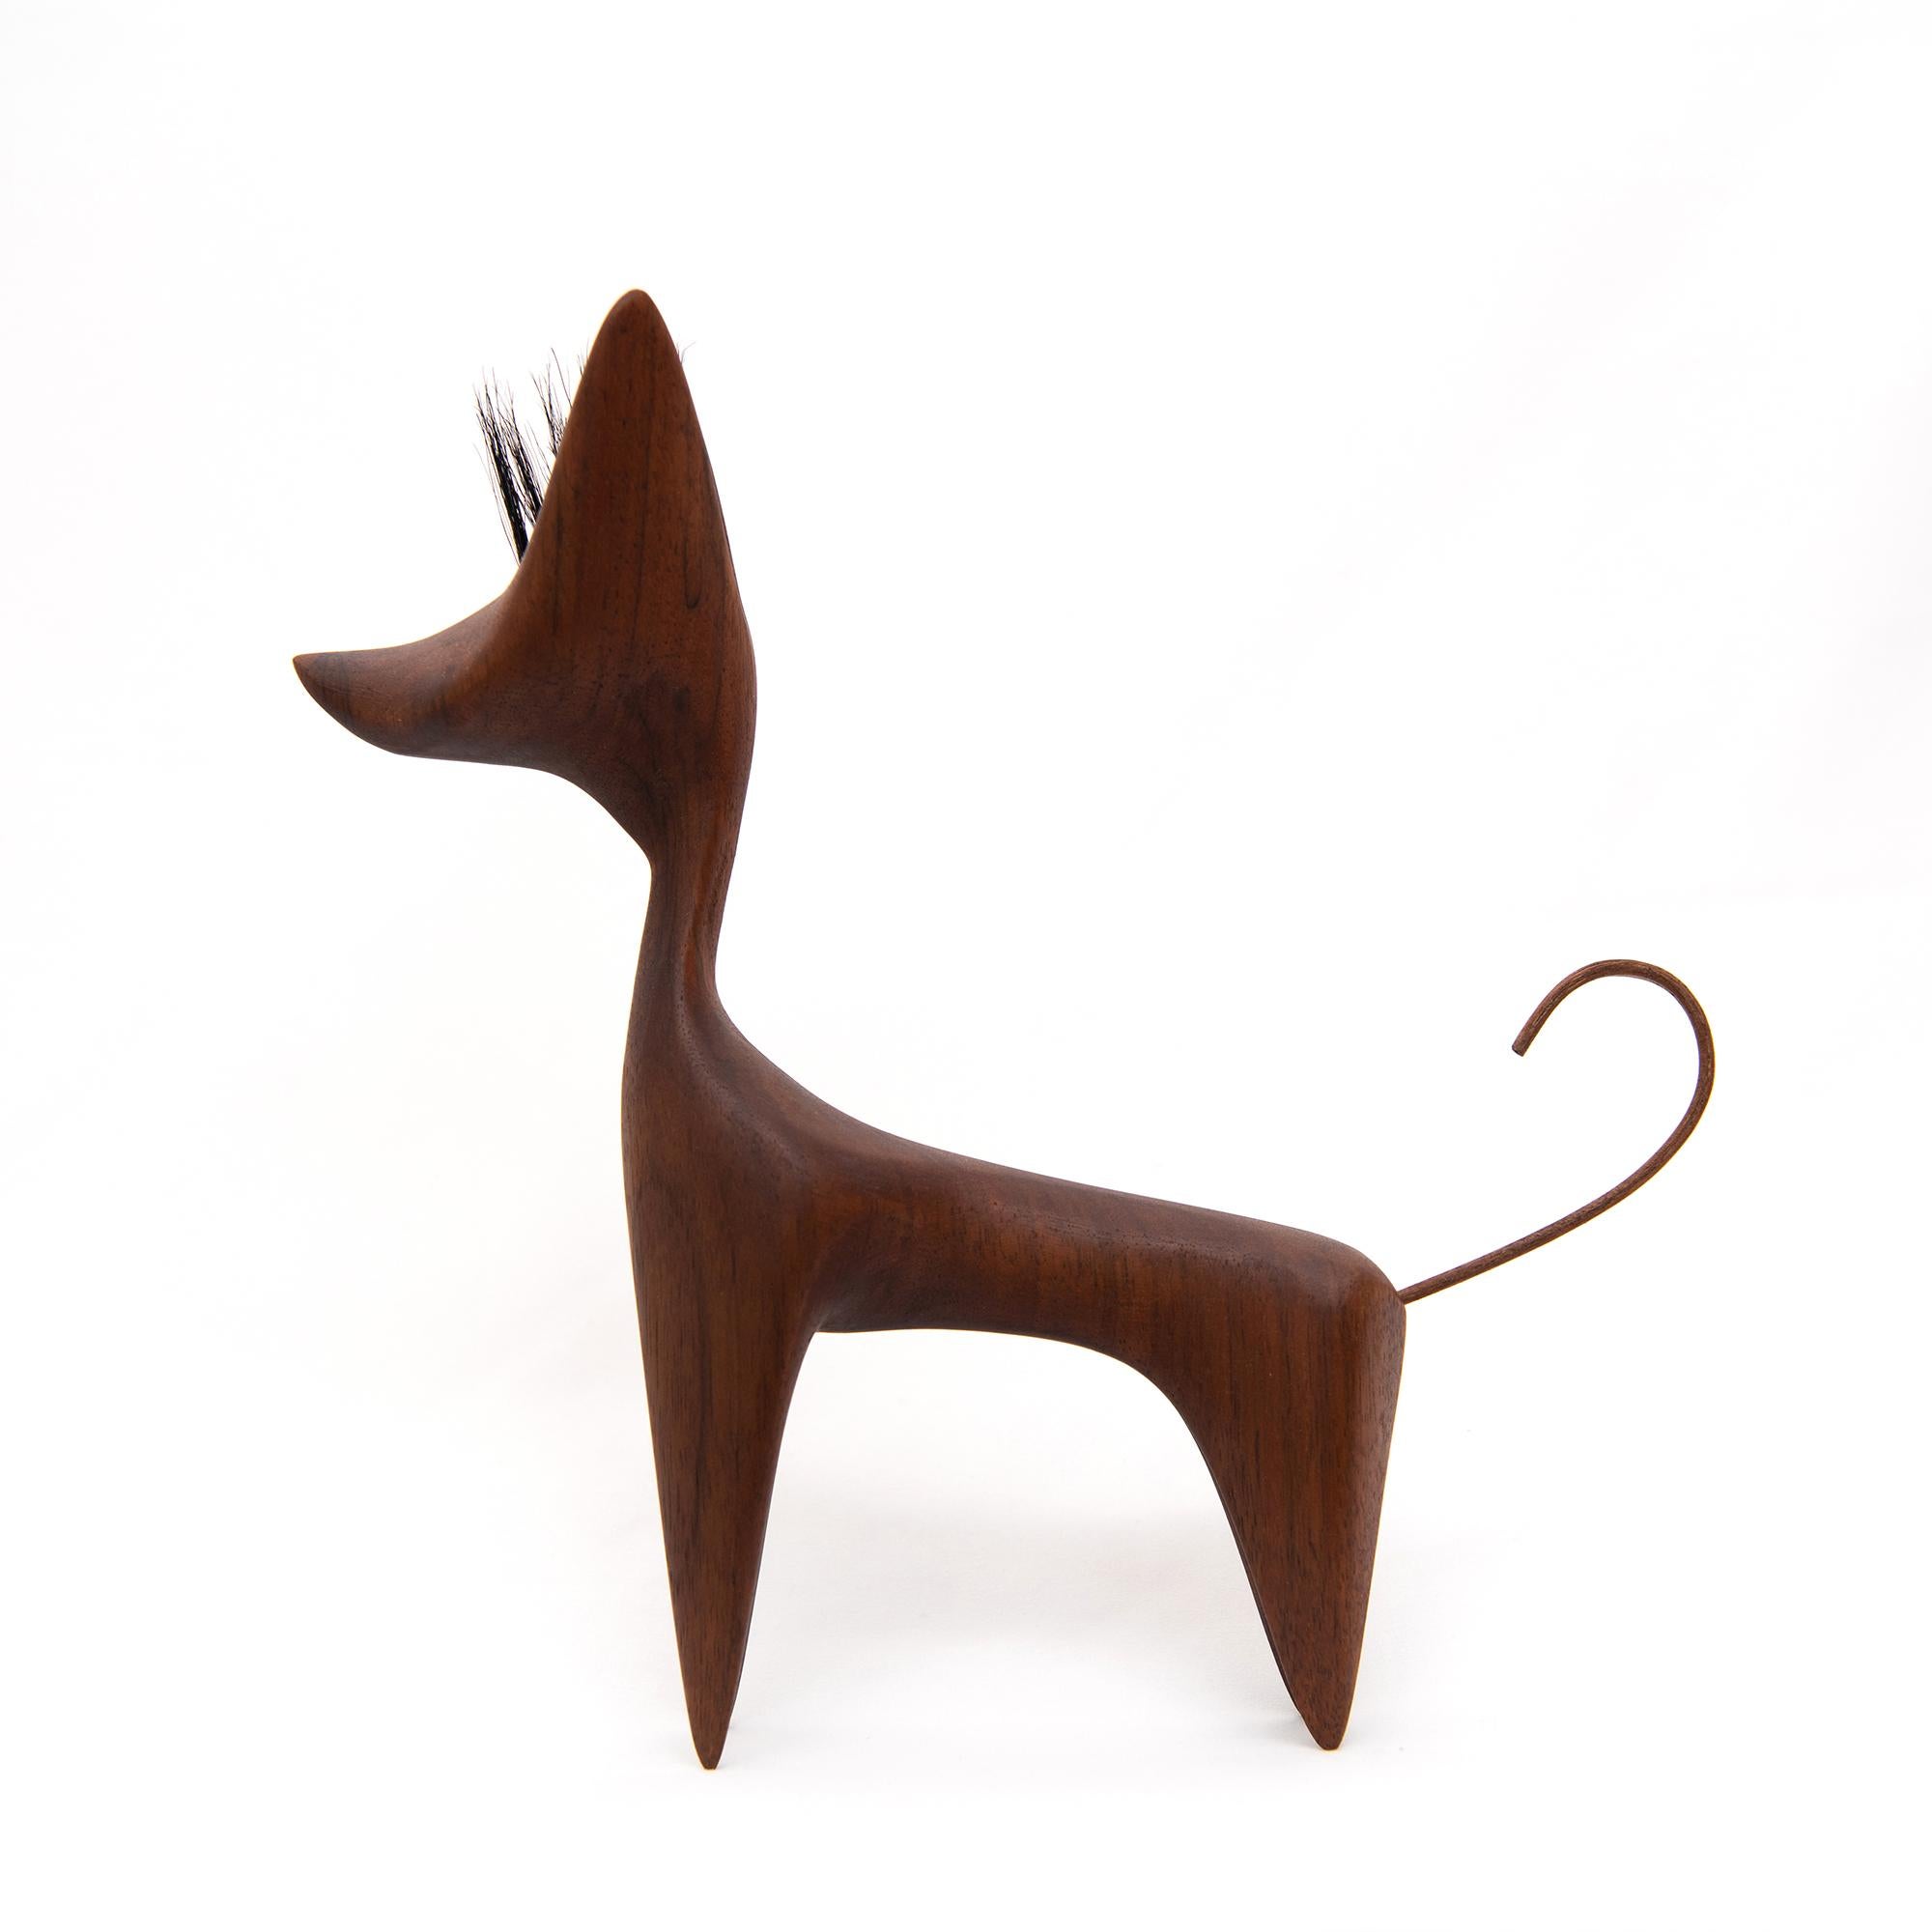 Carved Lola by Design VA . Xoloitzcuintle Wood Sculpture For Sale